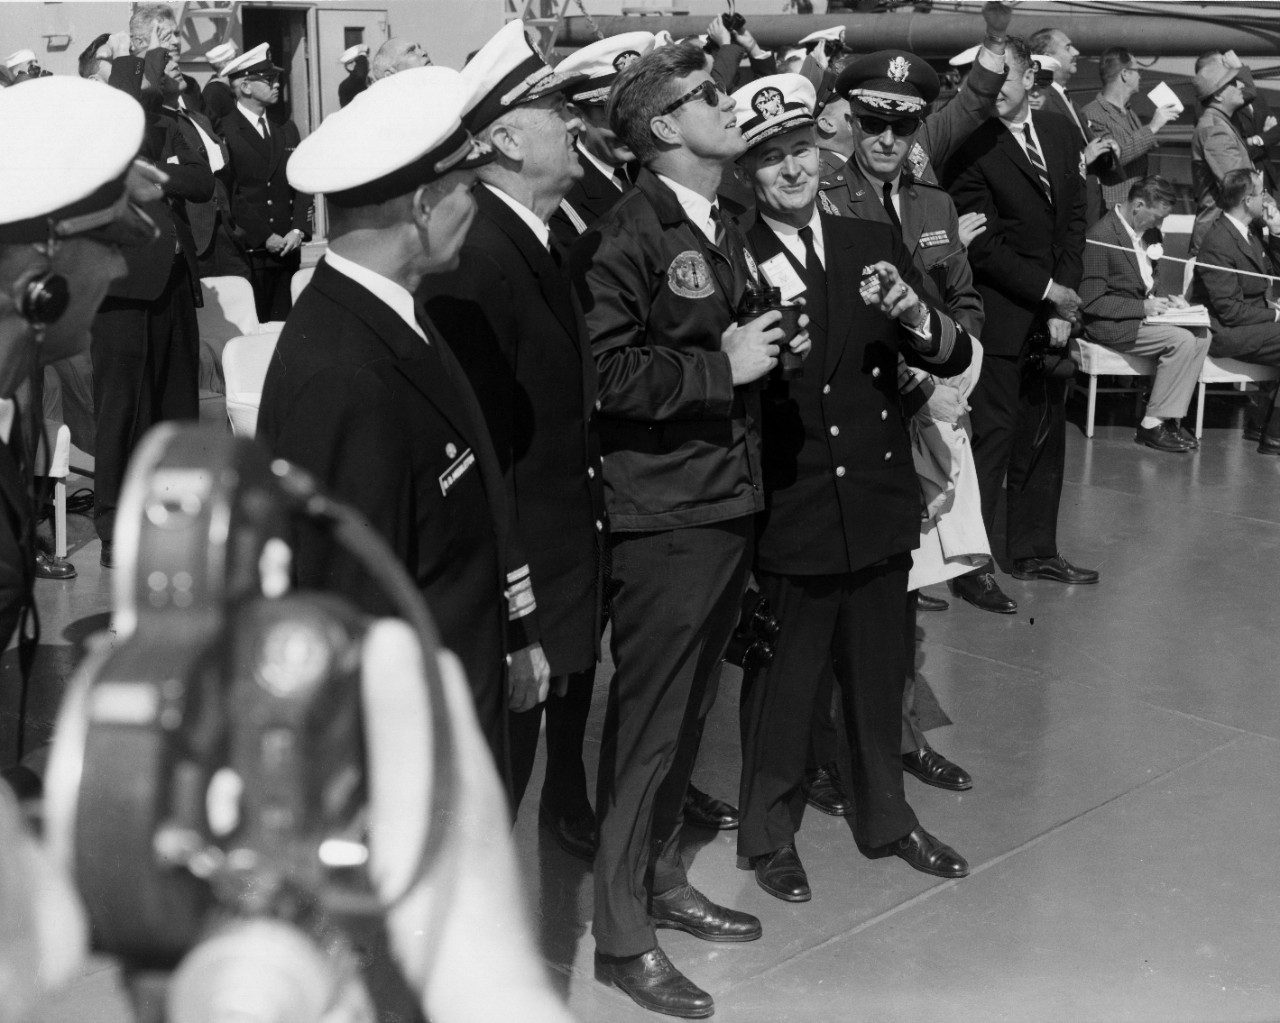 President Kennedy stands with Navy officers and looks to the sky